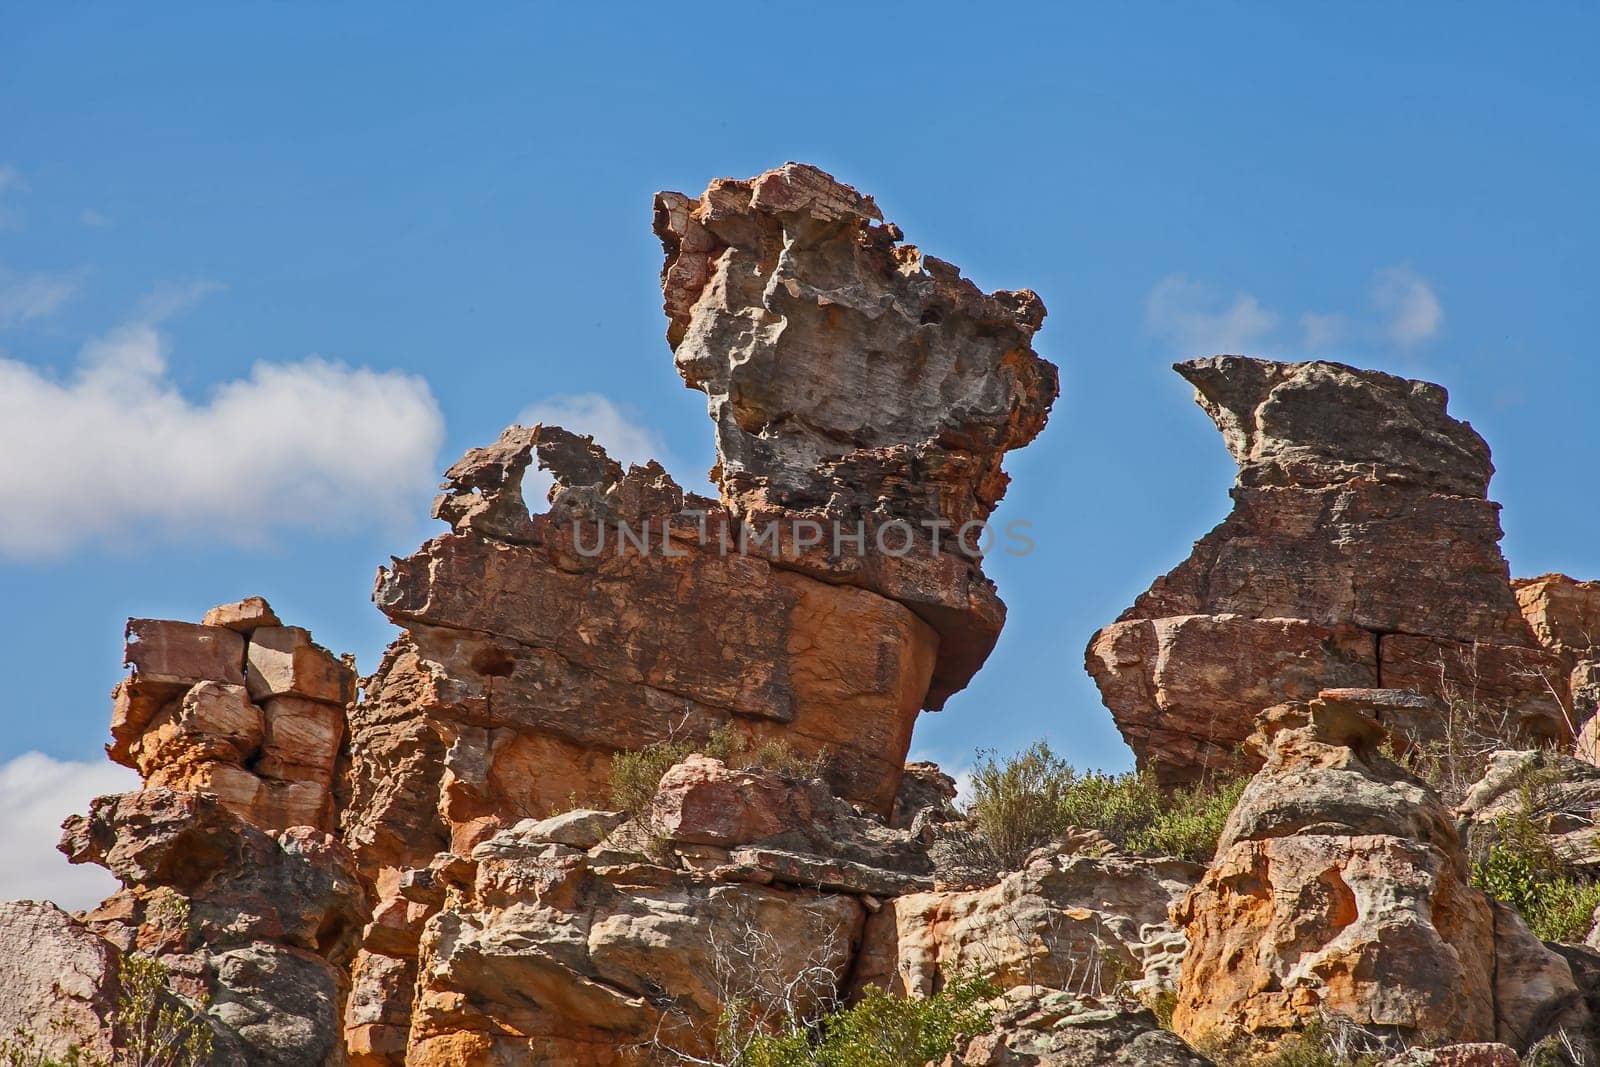 Cederberg Rock Formations 12967 by kobus_peche